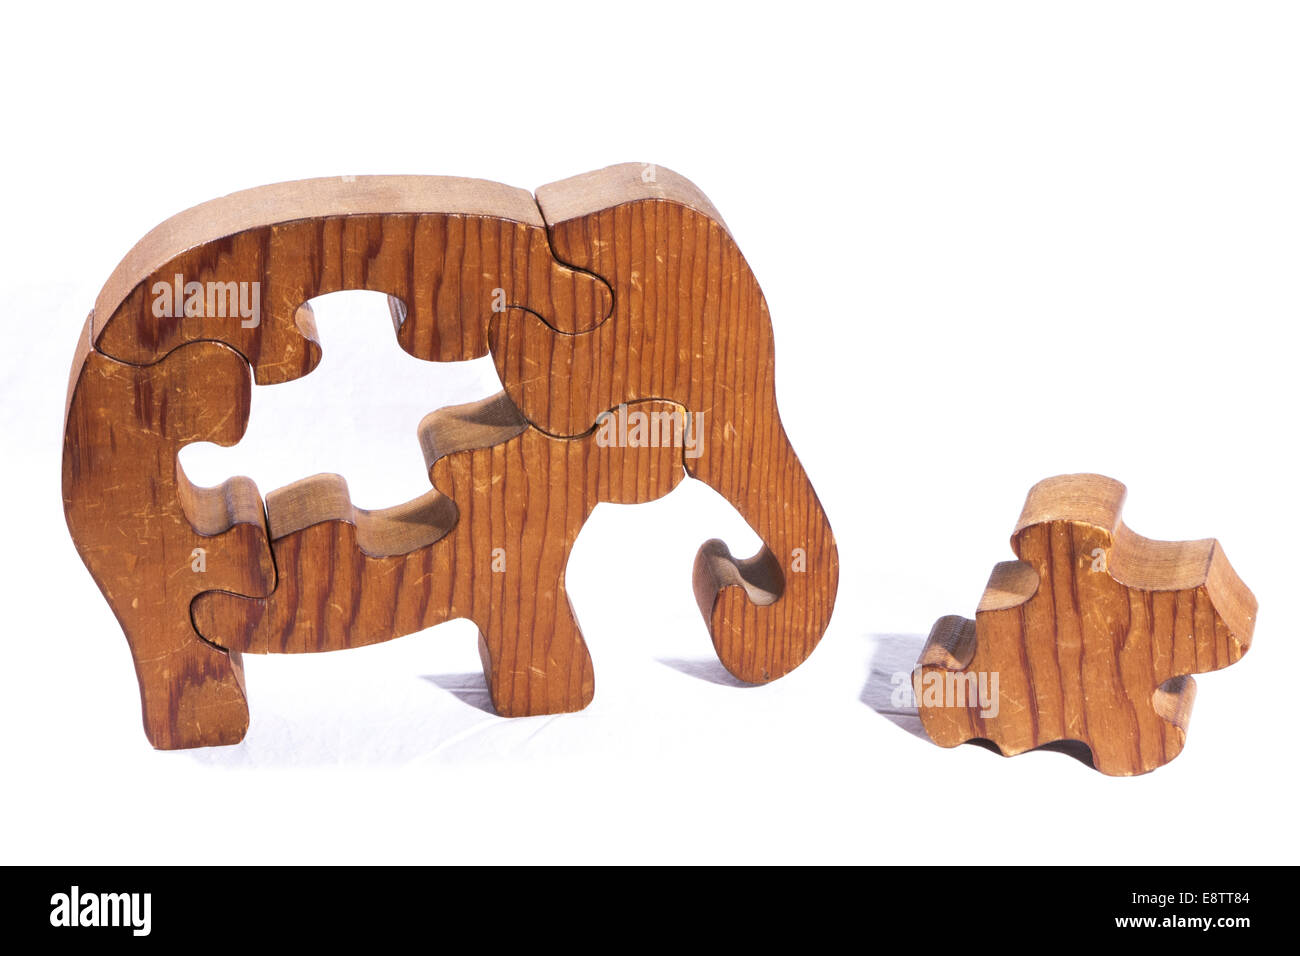 Wooden Elephant puzzle with a piece laying on the table. Stock Photo